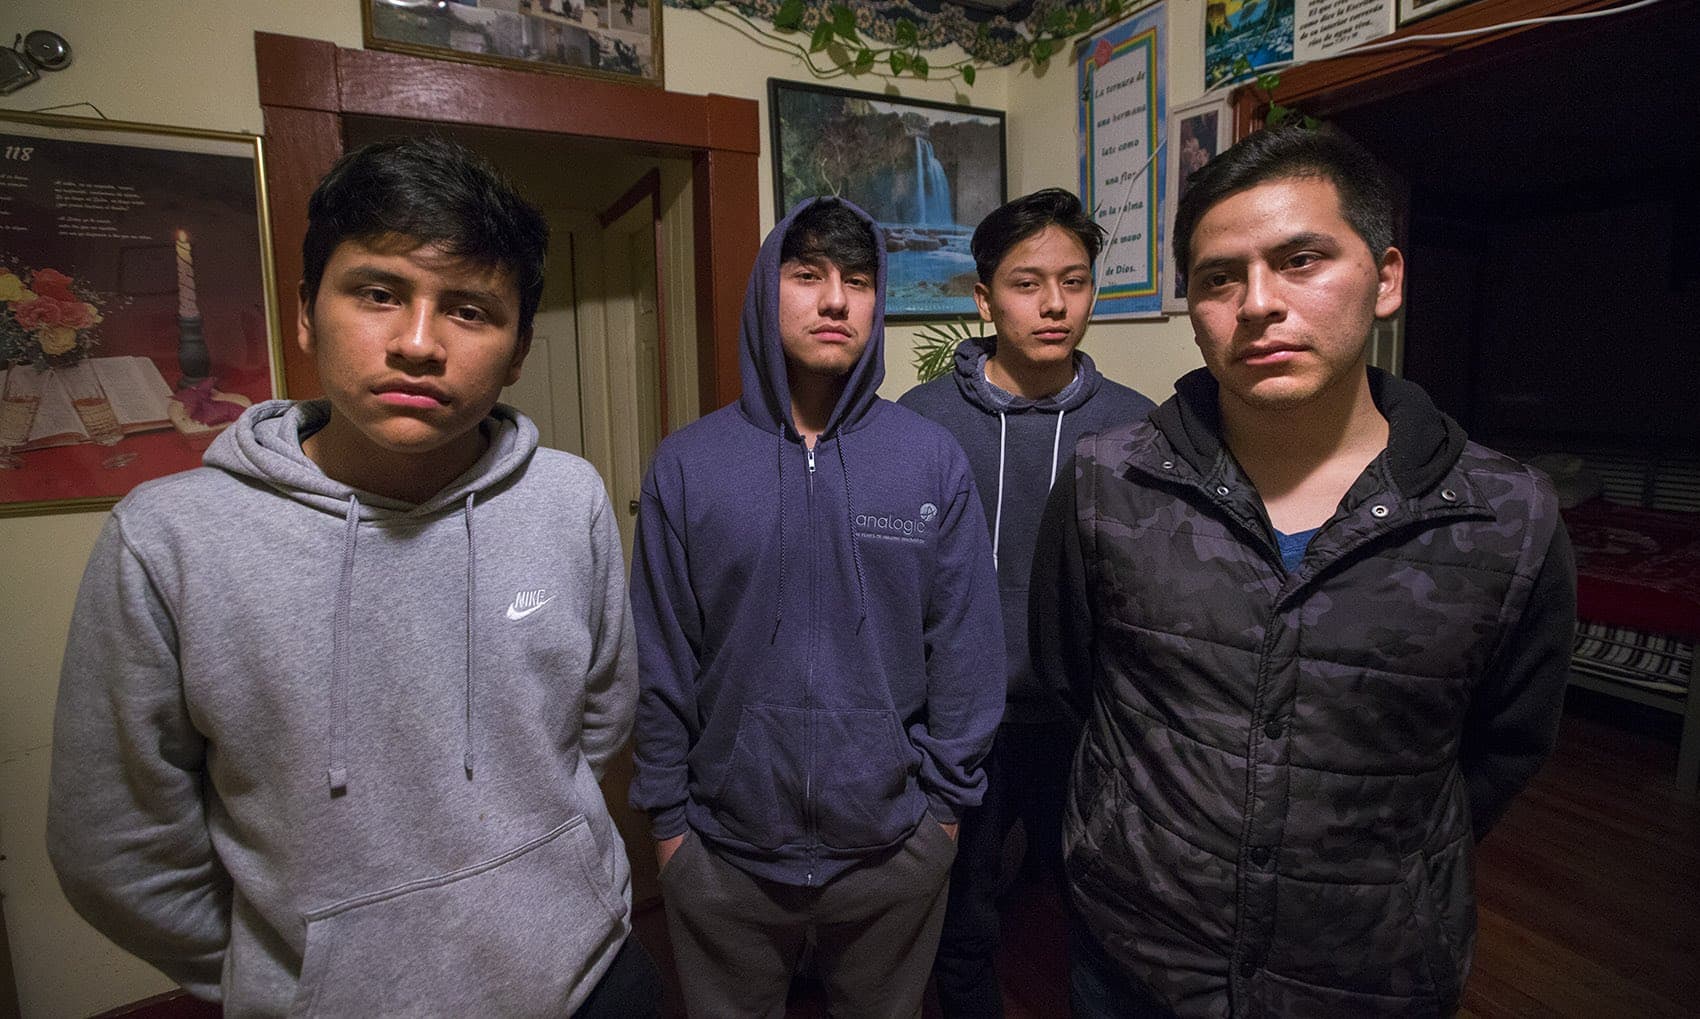 From left, the Macario brothers: Saul, 16, Erwin, 21, Anthony, 18, and Isidro, 27. Unlike his brothers, Isidro was not born in the U.S. and was deported to Guatemala on Wednesday. (Jesse Costa/WBUR)